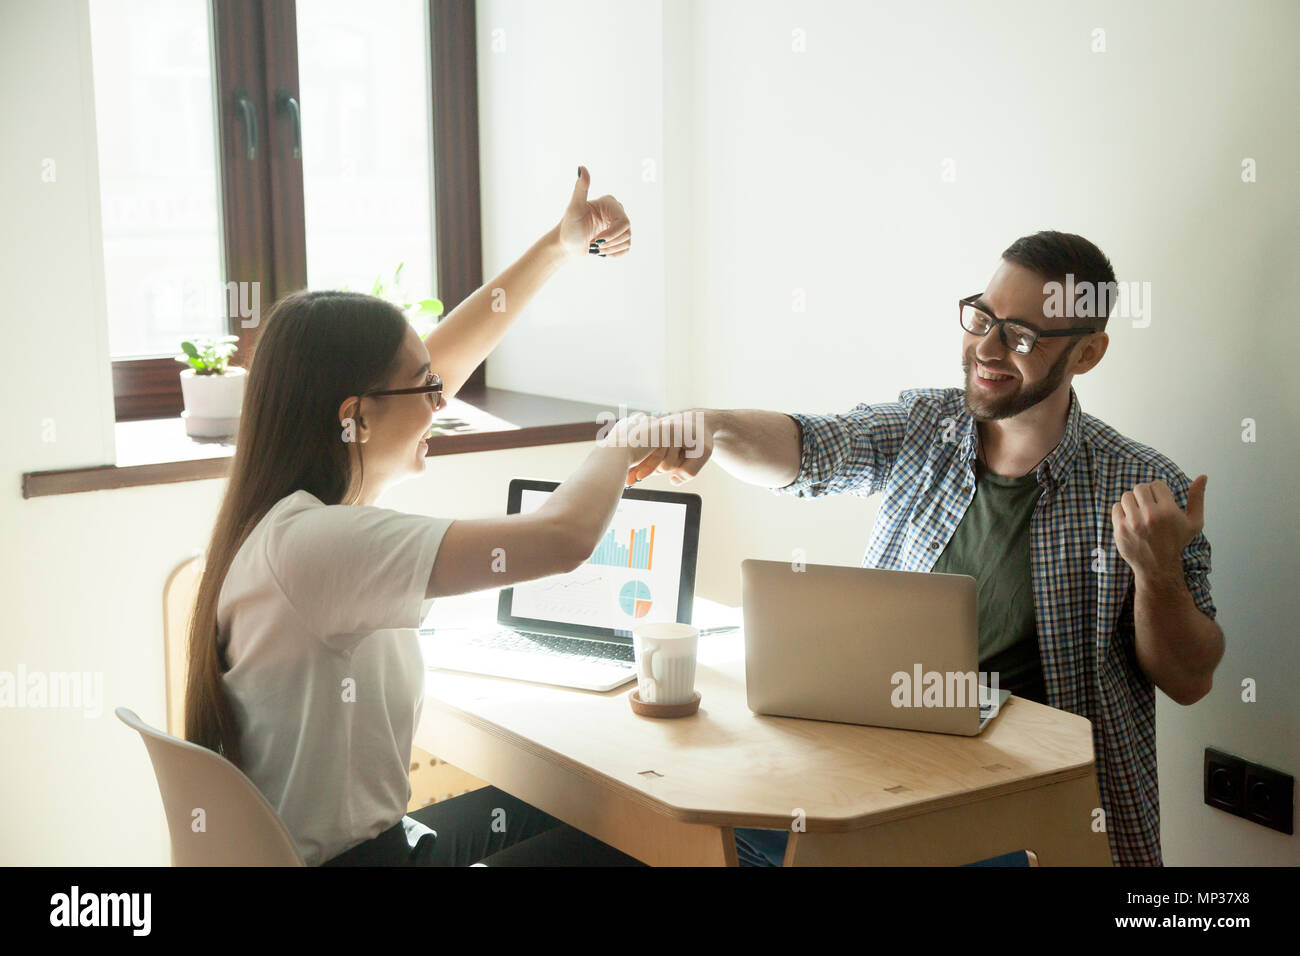 Smiling freelancers giving fists bump and showing thumbs up Stock Photo